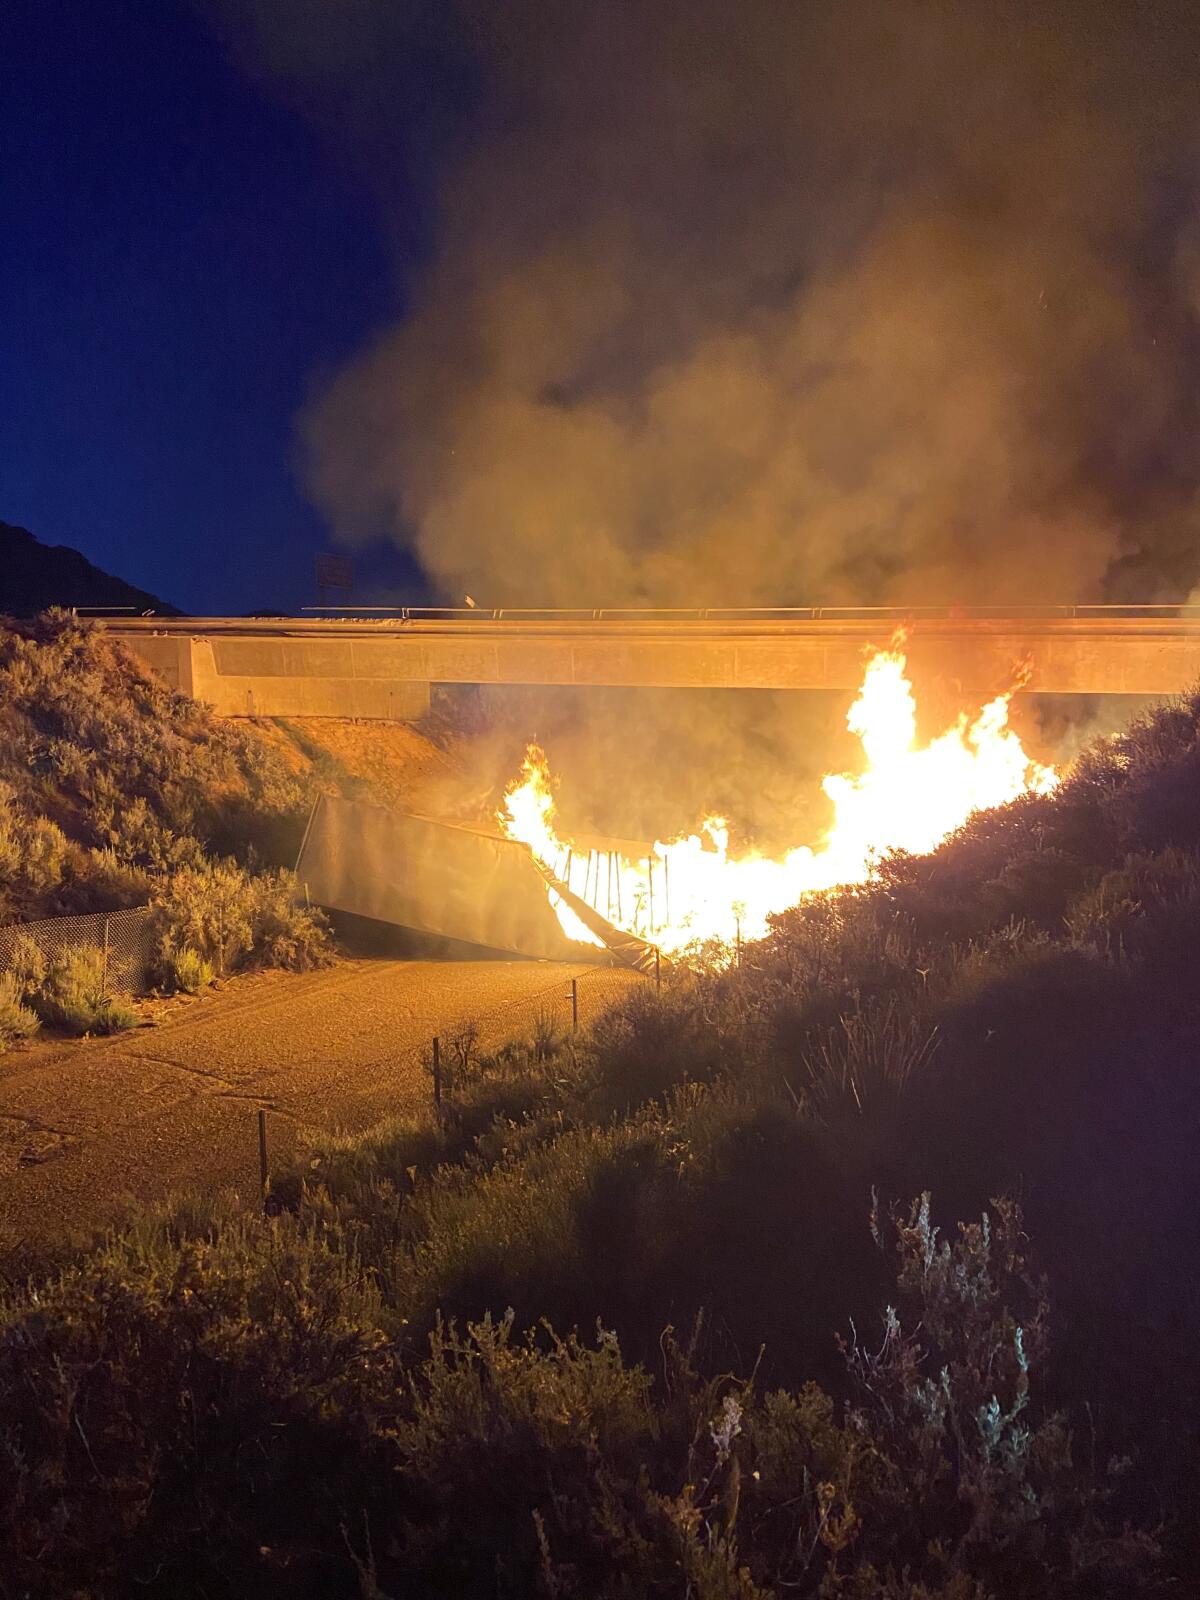 A semi trailer burns Wednesday night after it crashed off an I-8 bridge in the East County mountains.